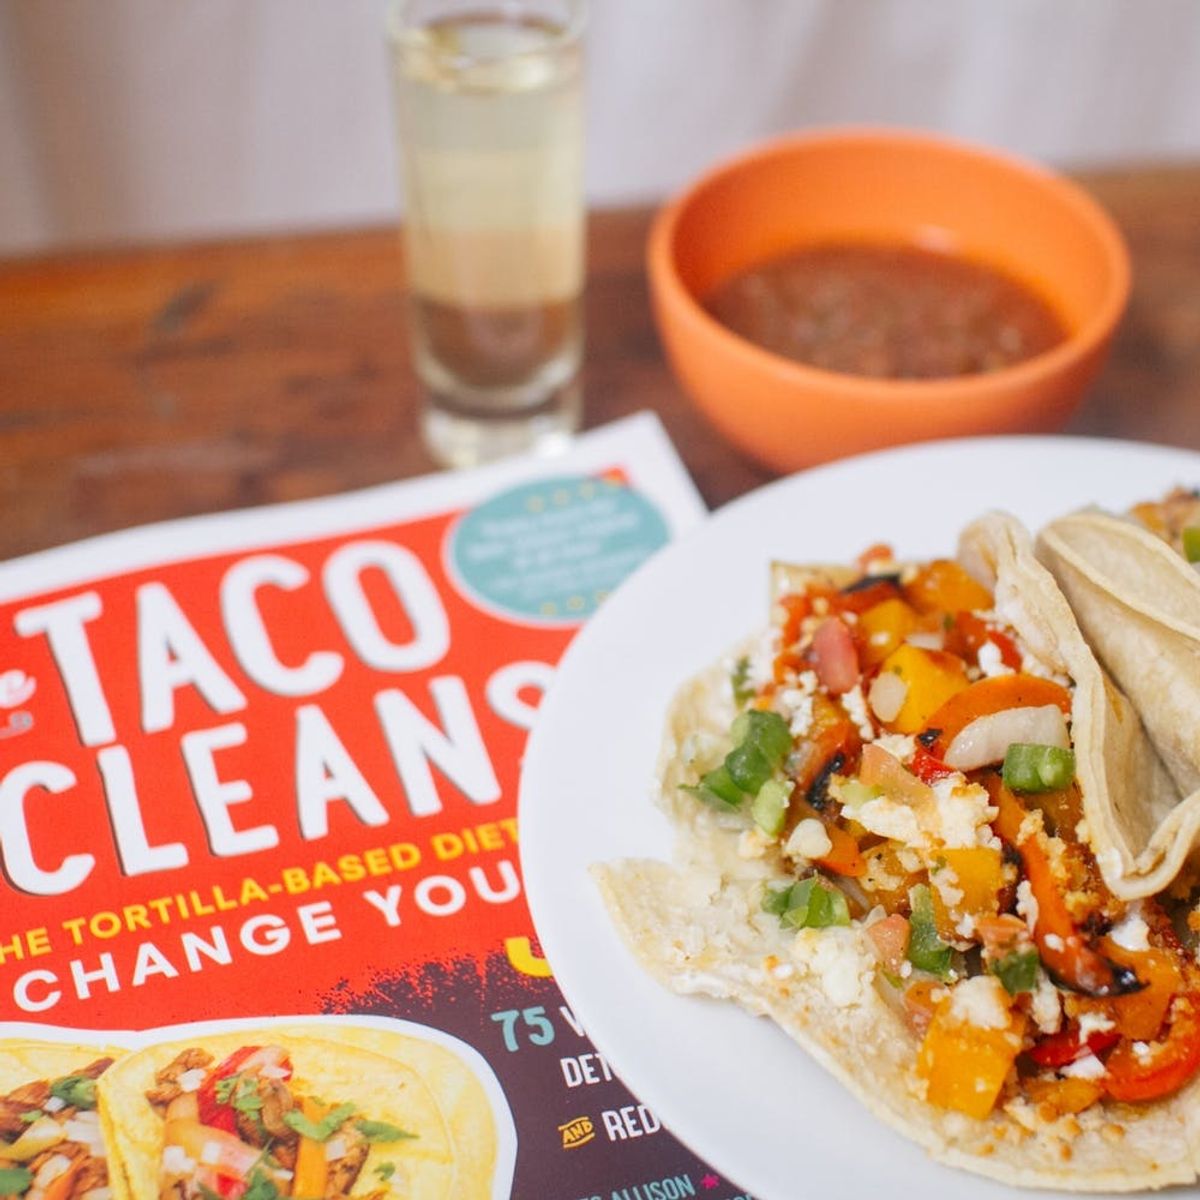 I Only Ate Tacos for a Week for the Taco Cleanse — This Is What Happened